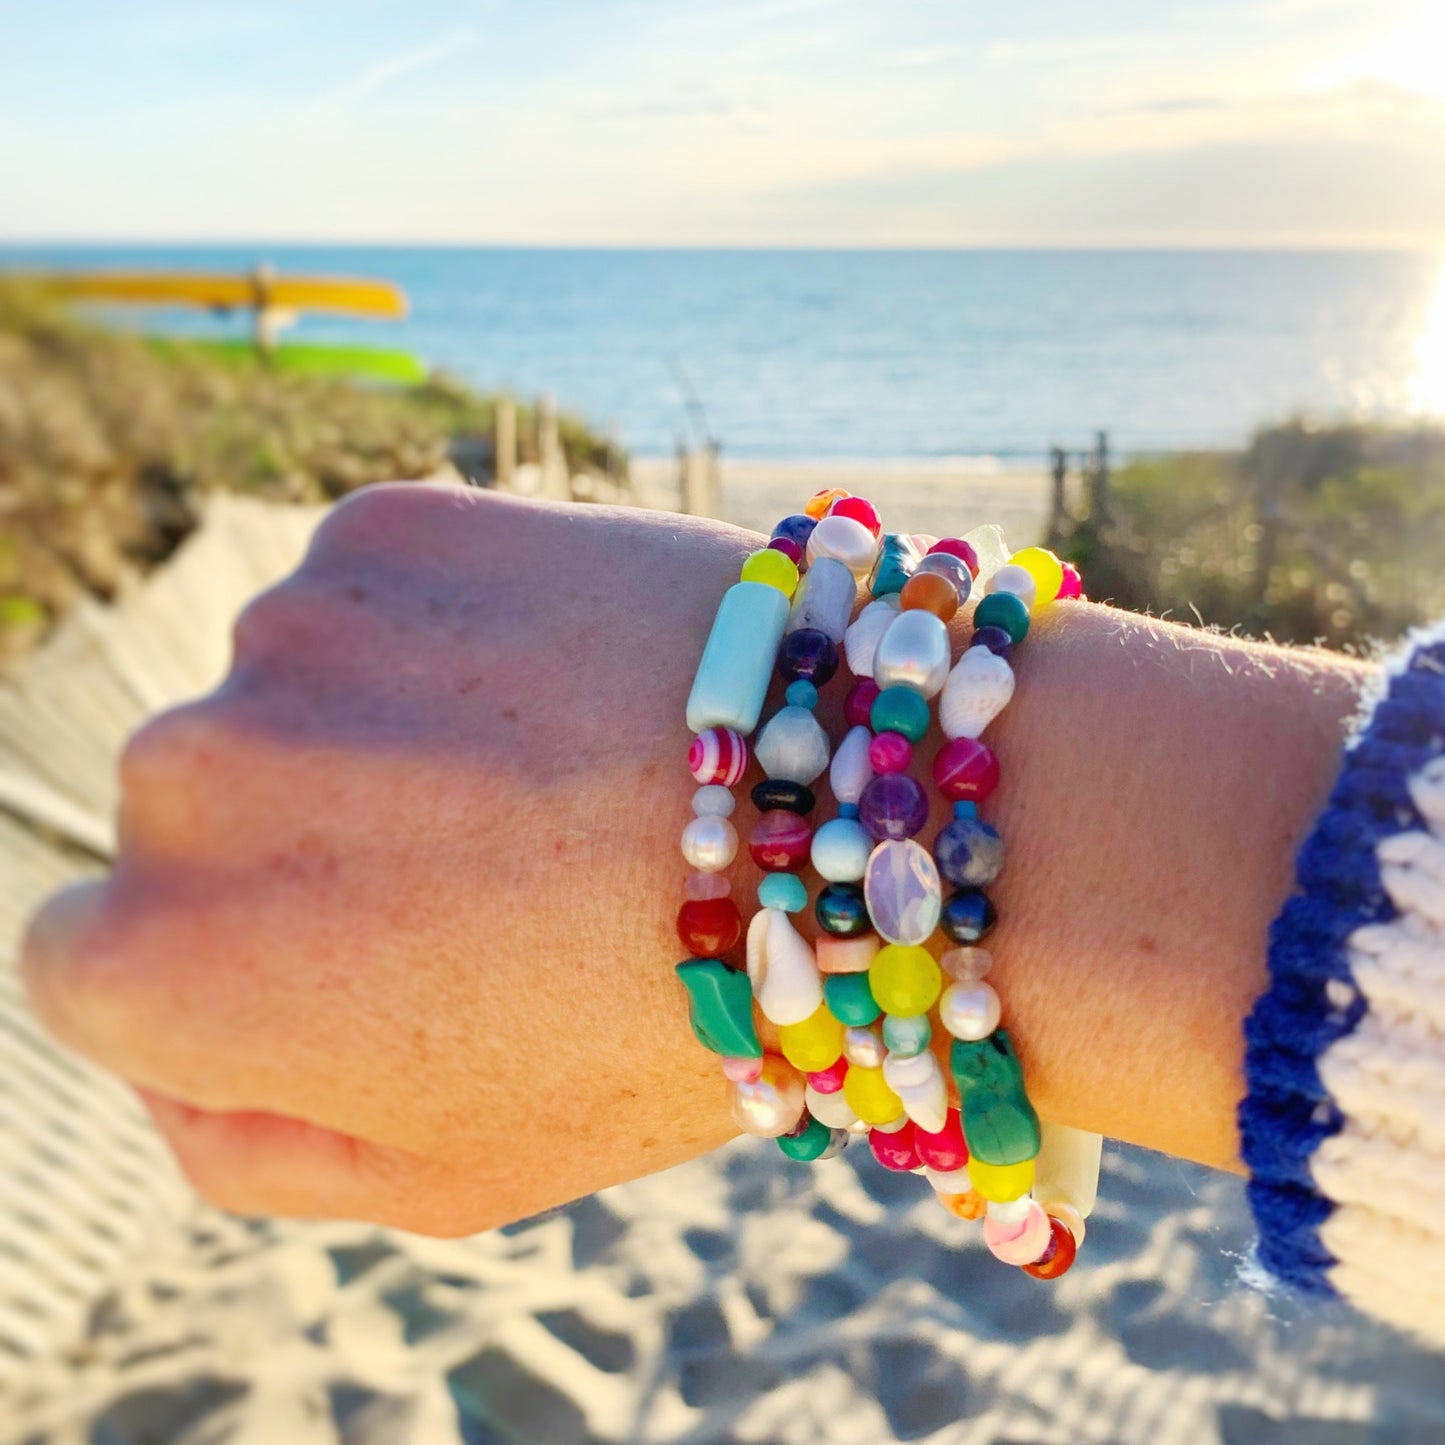 Treasure bracelets are a mix of bright, precious and semiprecious stones and freshwater pearls on a stretchy bracelet. Pictured is a wrist stacked with 5 treasure bracelets held up in front of a beach scene